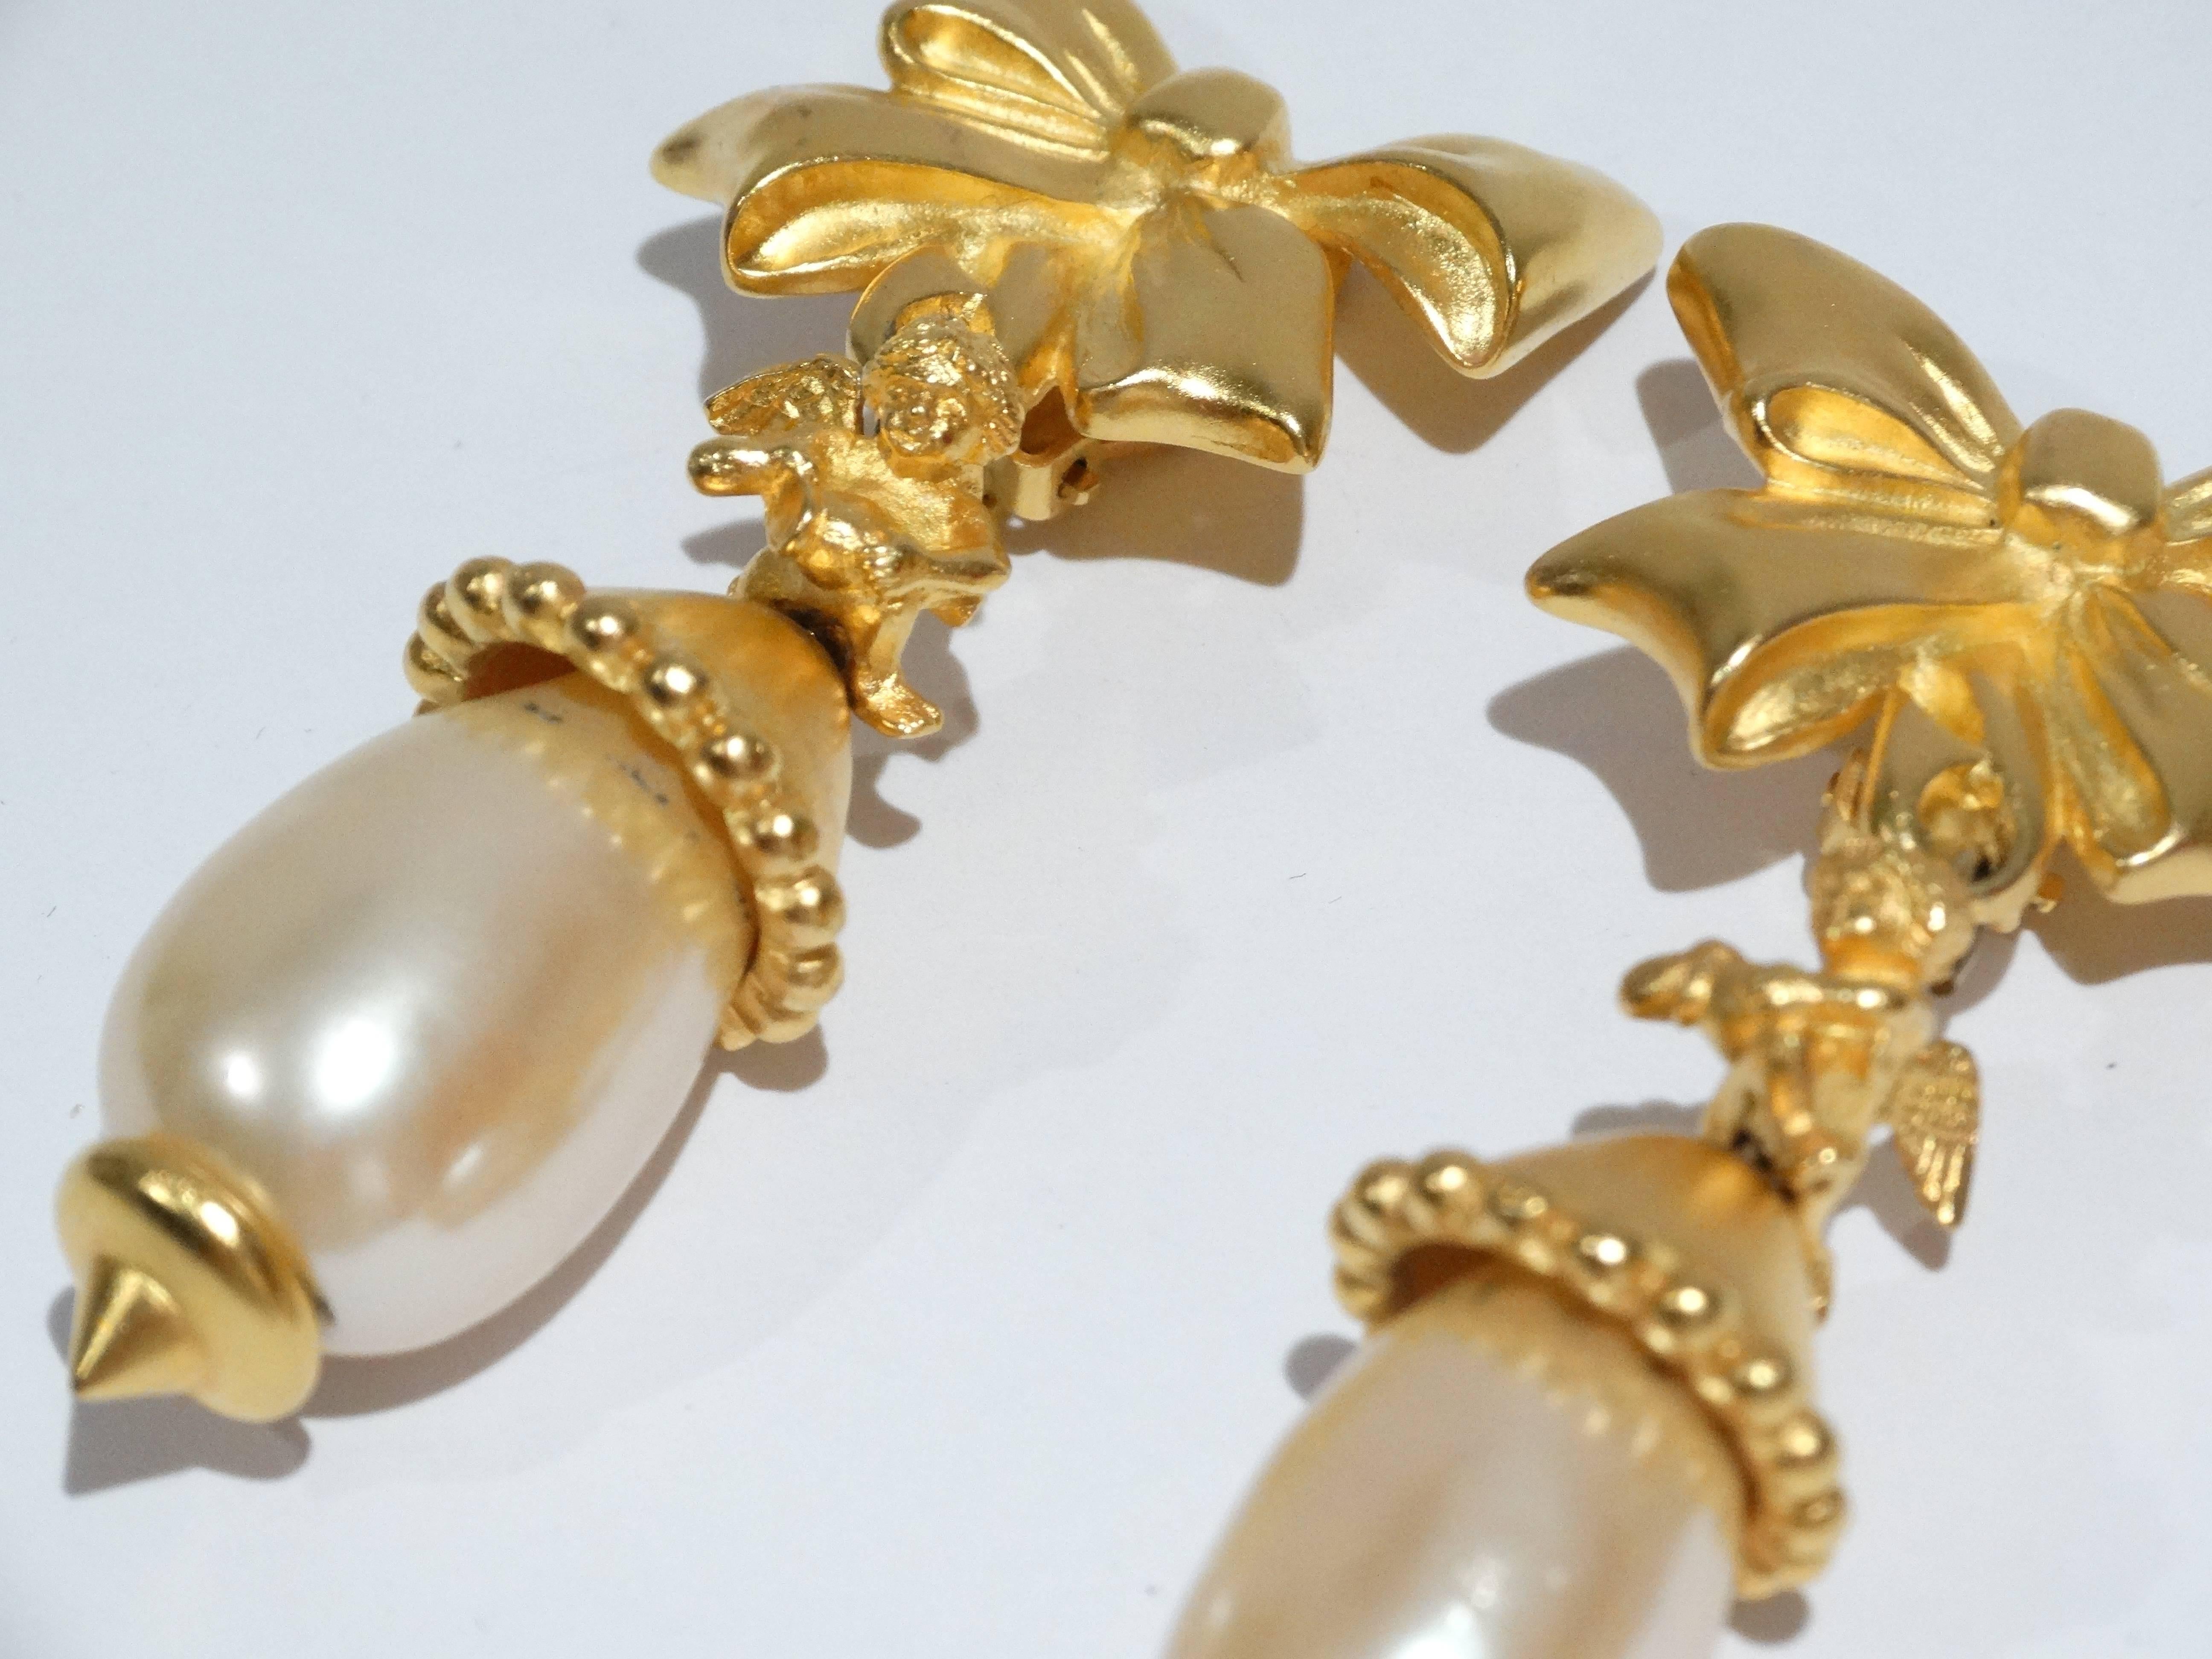 Rare 1980's Lagerfeld clip earrings with bow and cherub details. Large pearl drop set in gold guilt. Signed KL with a fan water mark of Karl Lagerfeld. 3.5 inches long and 2 inches wide. Great earring to take from day to night 